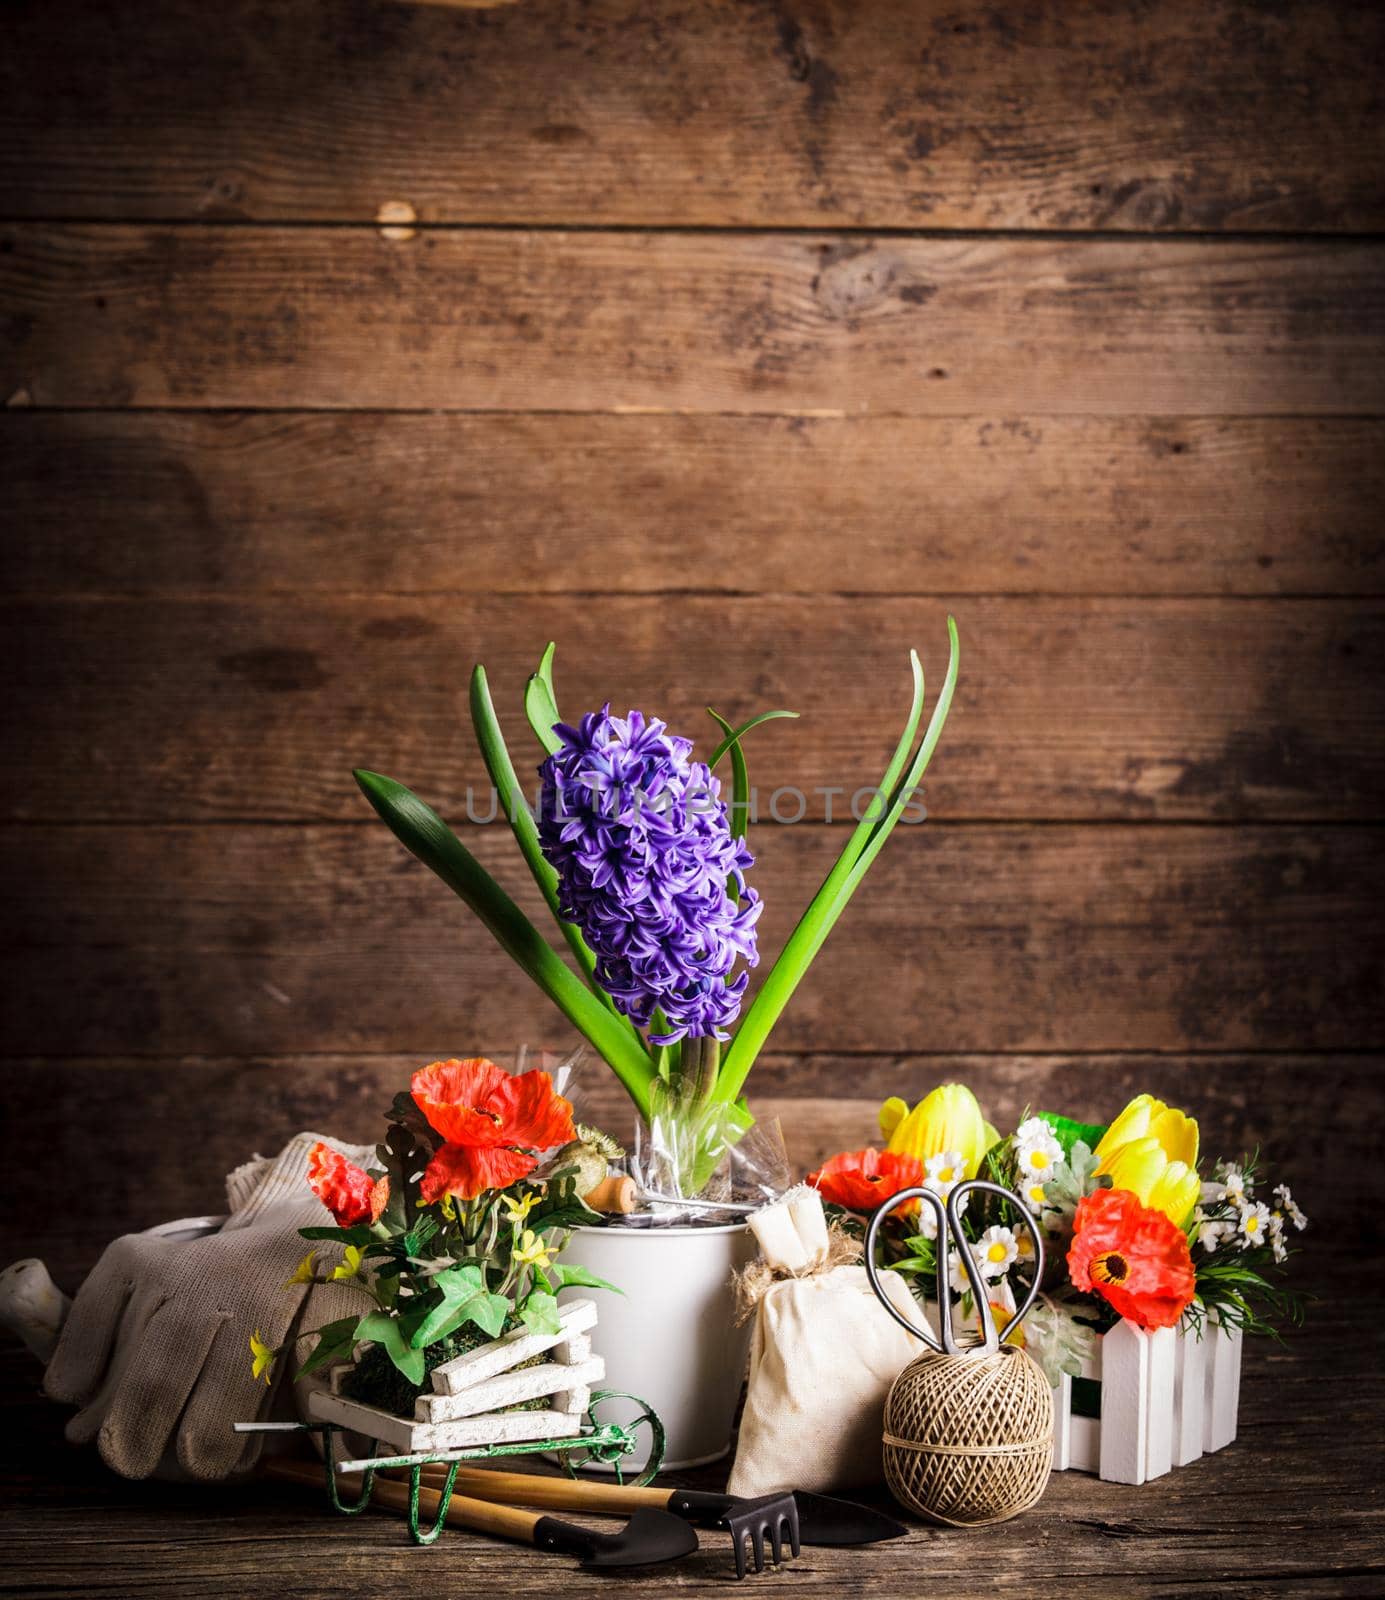 Garden tools for flowers over wooden background